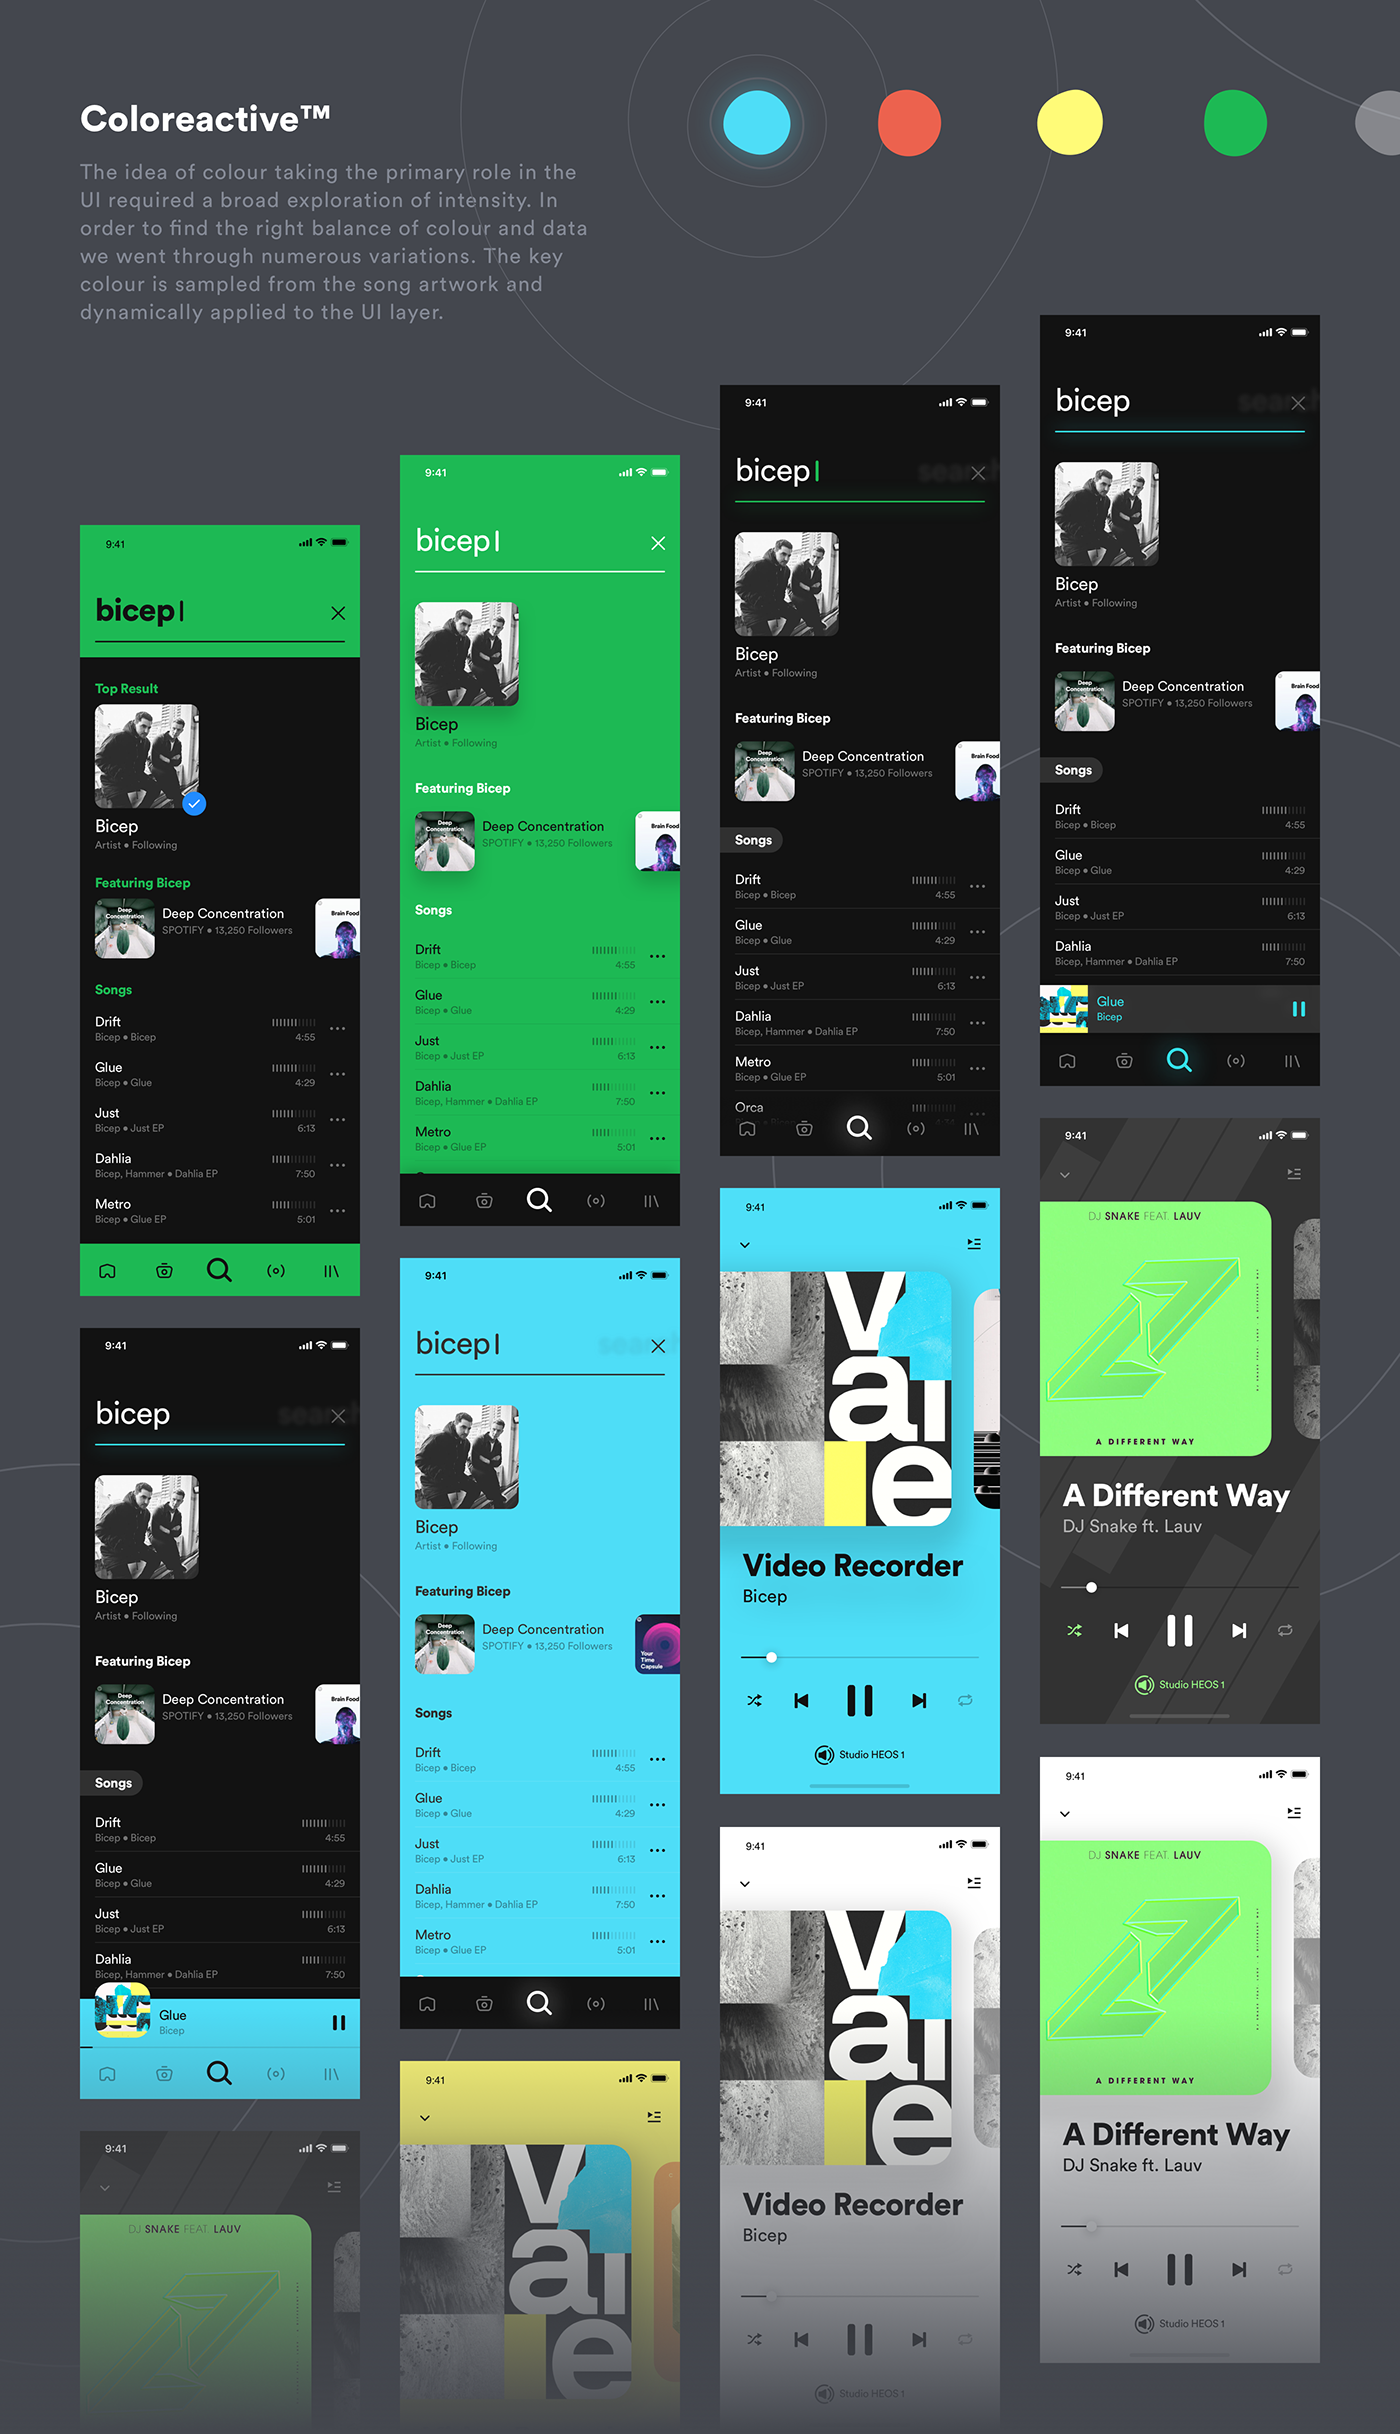 music player management Retro colorful playlist songs Streaming spotify heos